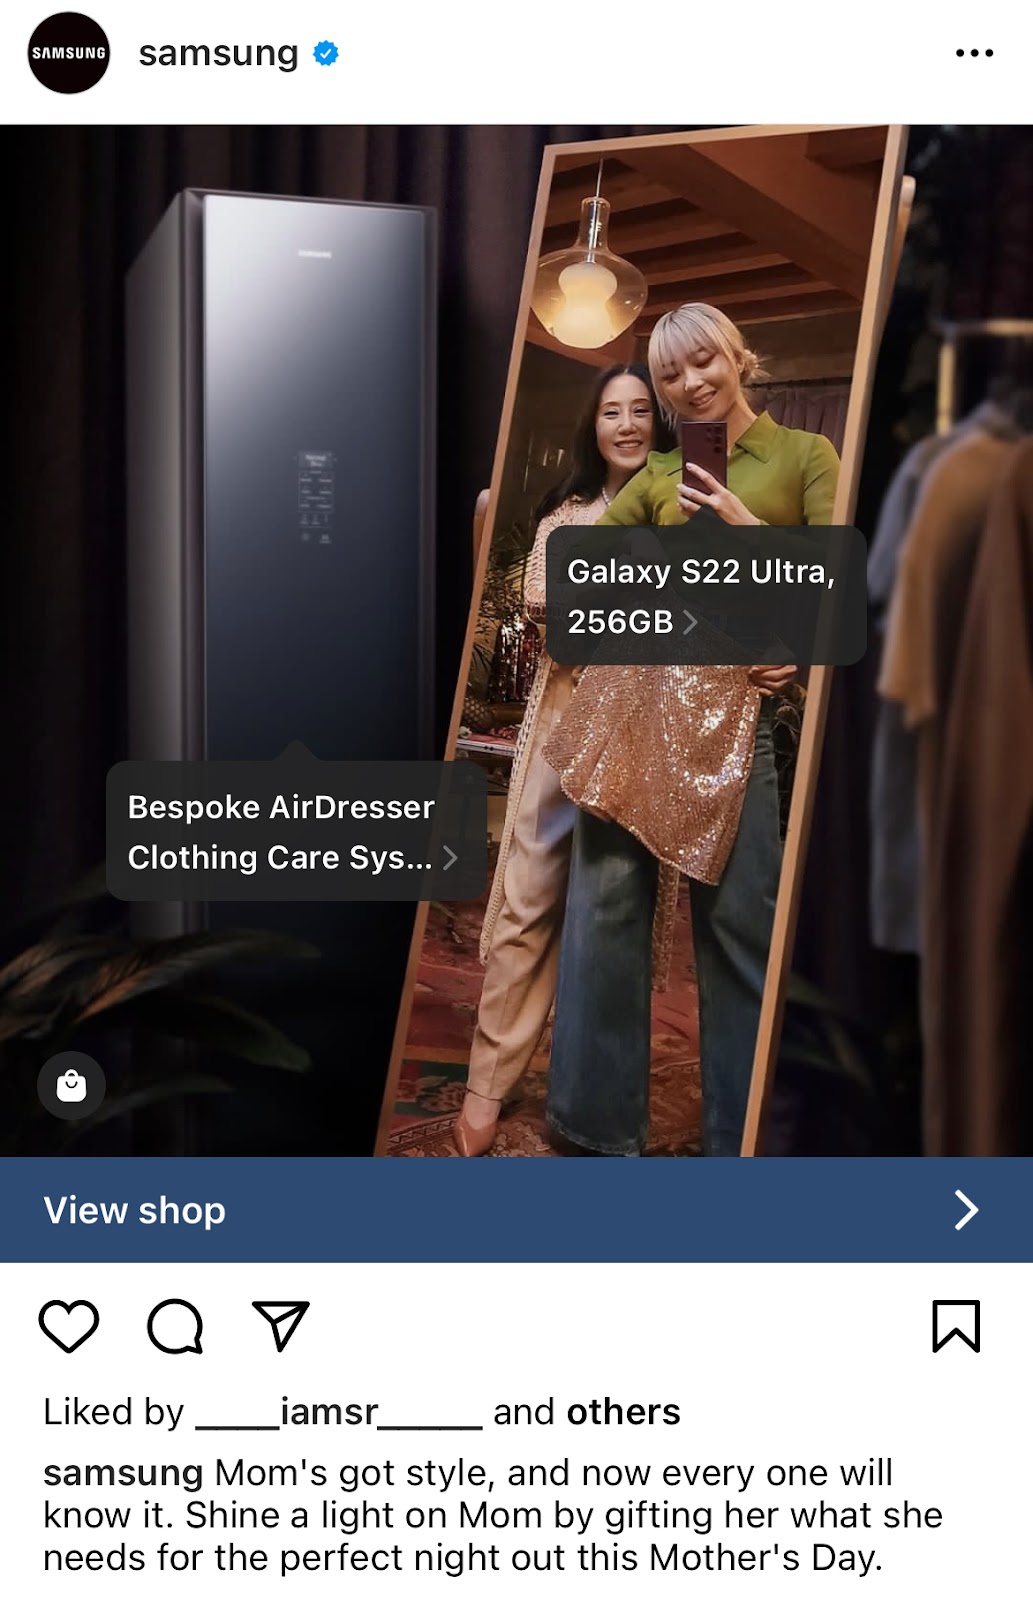 Samsung Instagram product tags